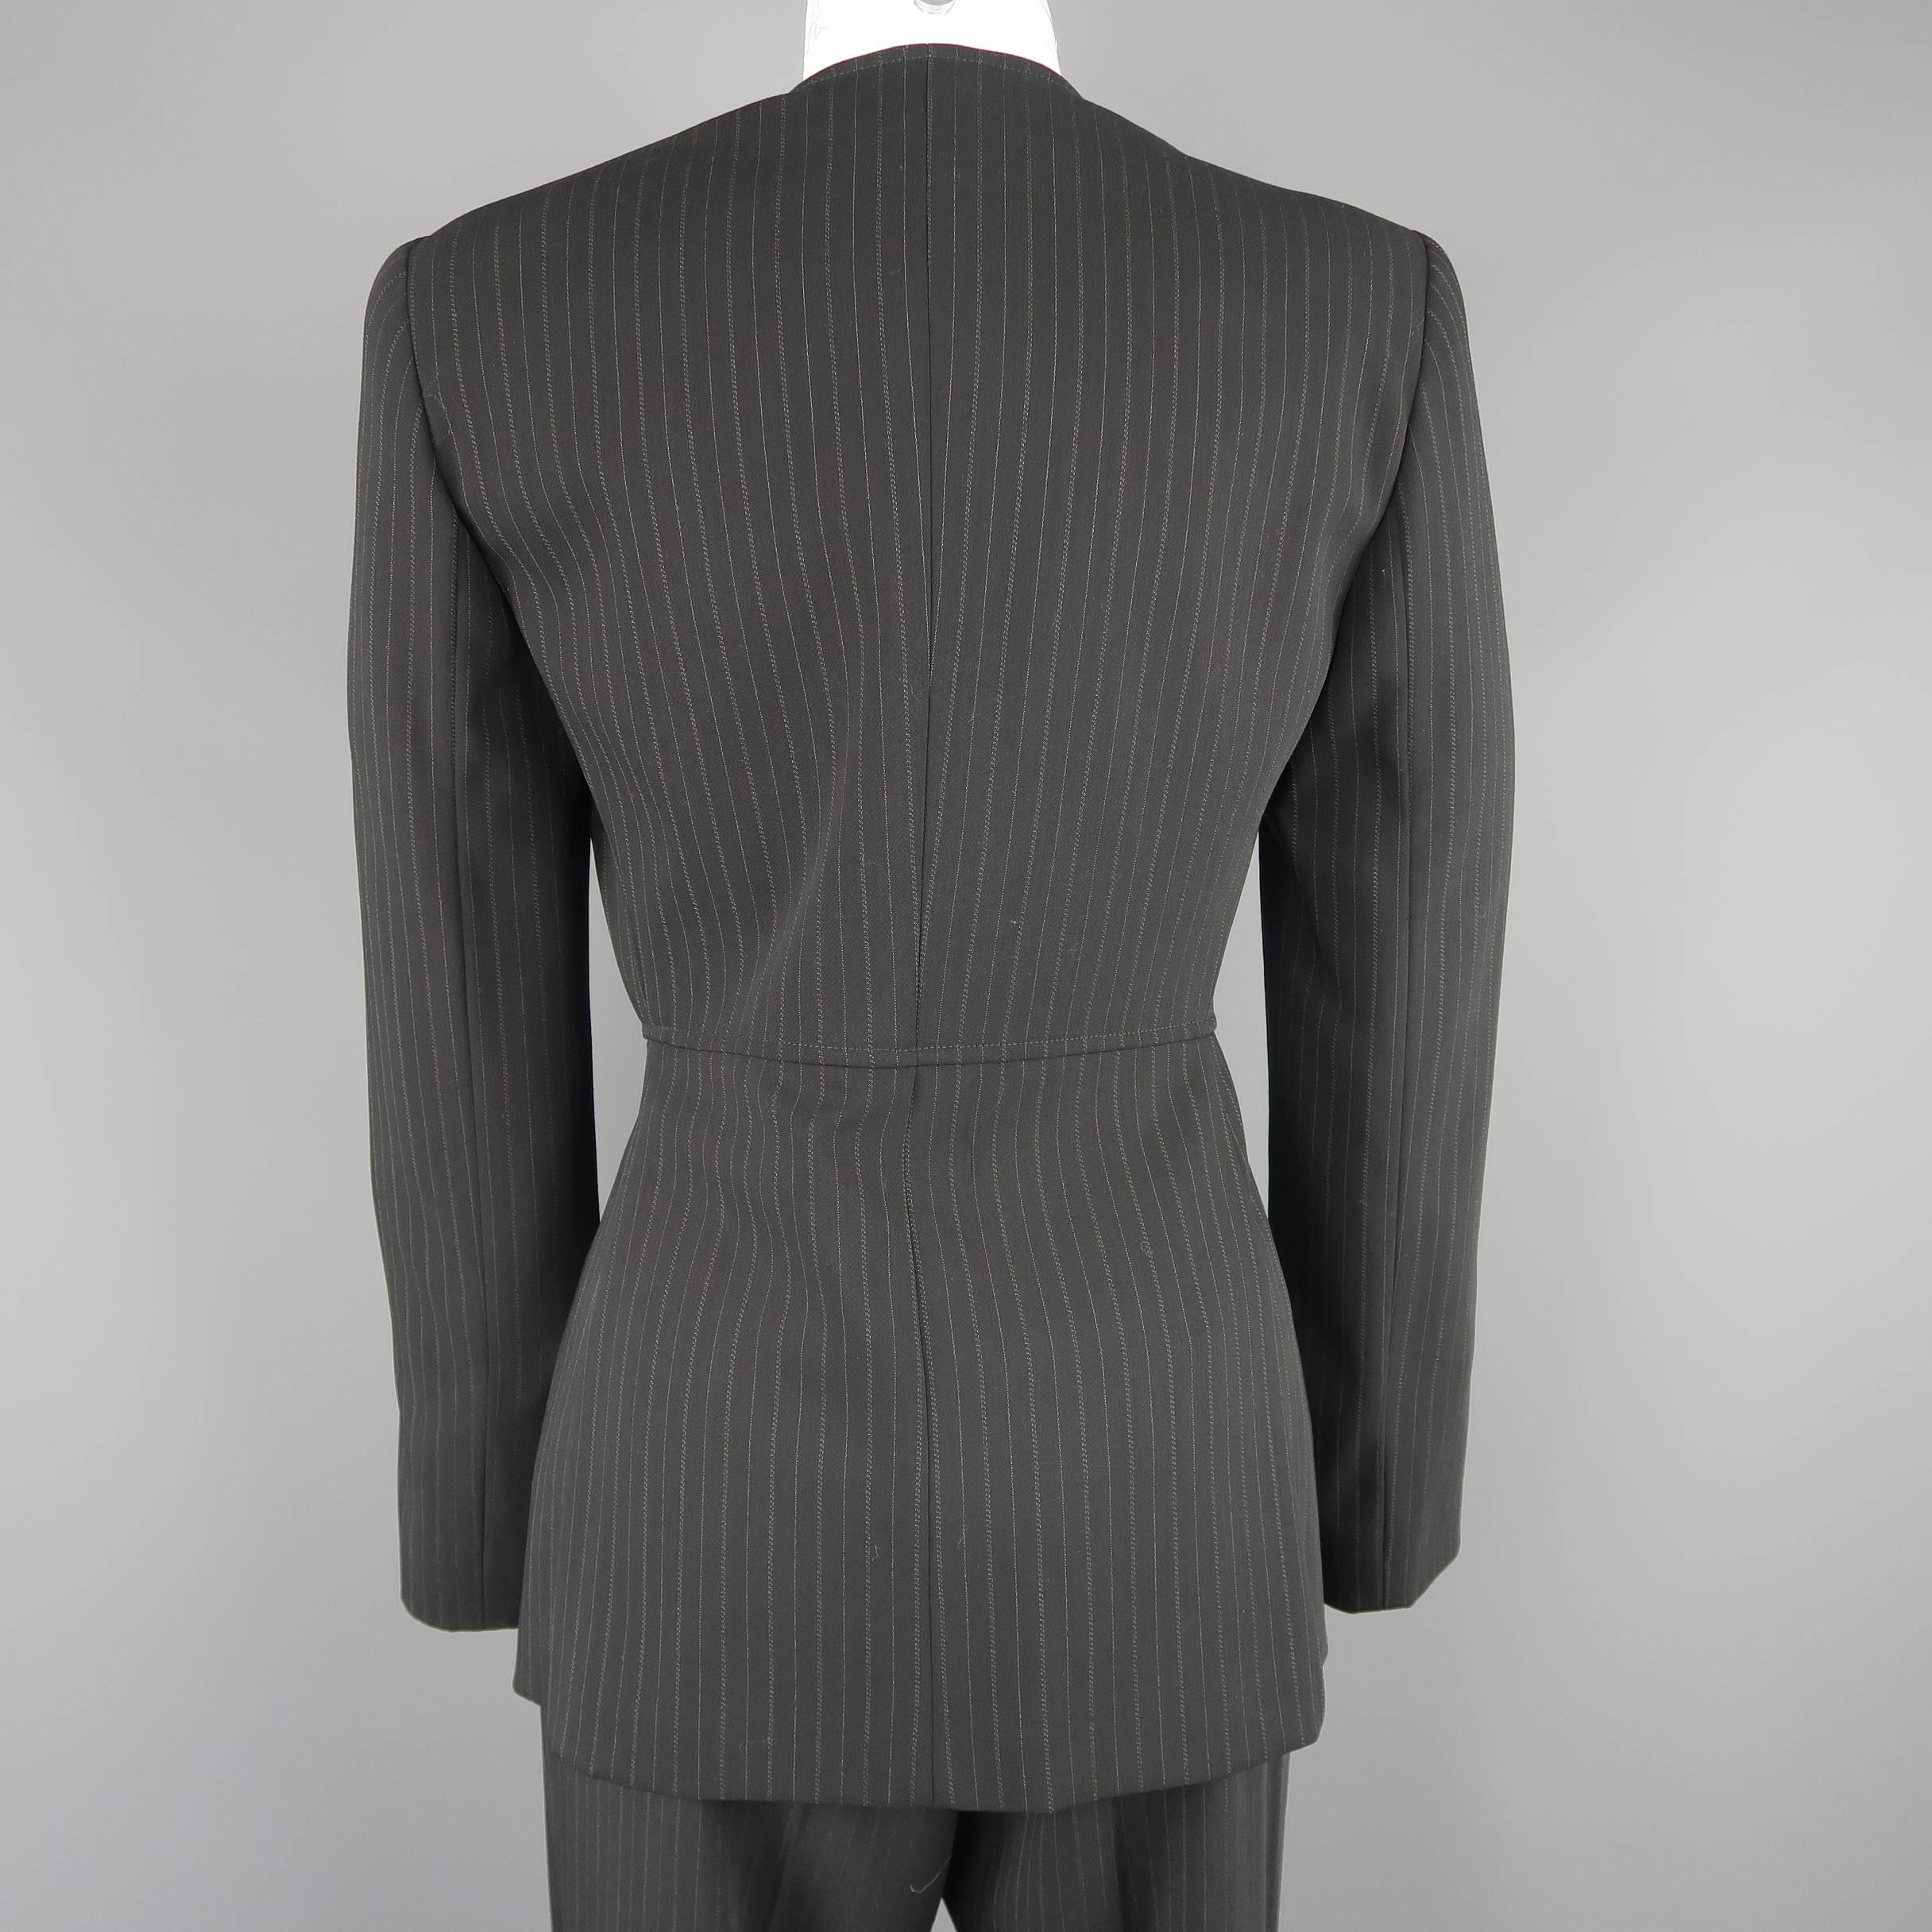 GIORGIO ARMANI Size 6 Black Pinstripe Wool Double Breasted Pants Suit 3